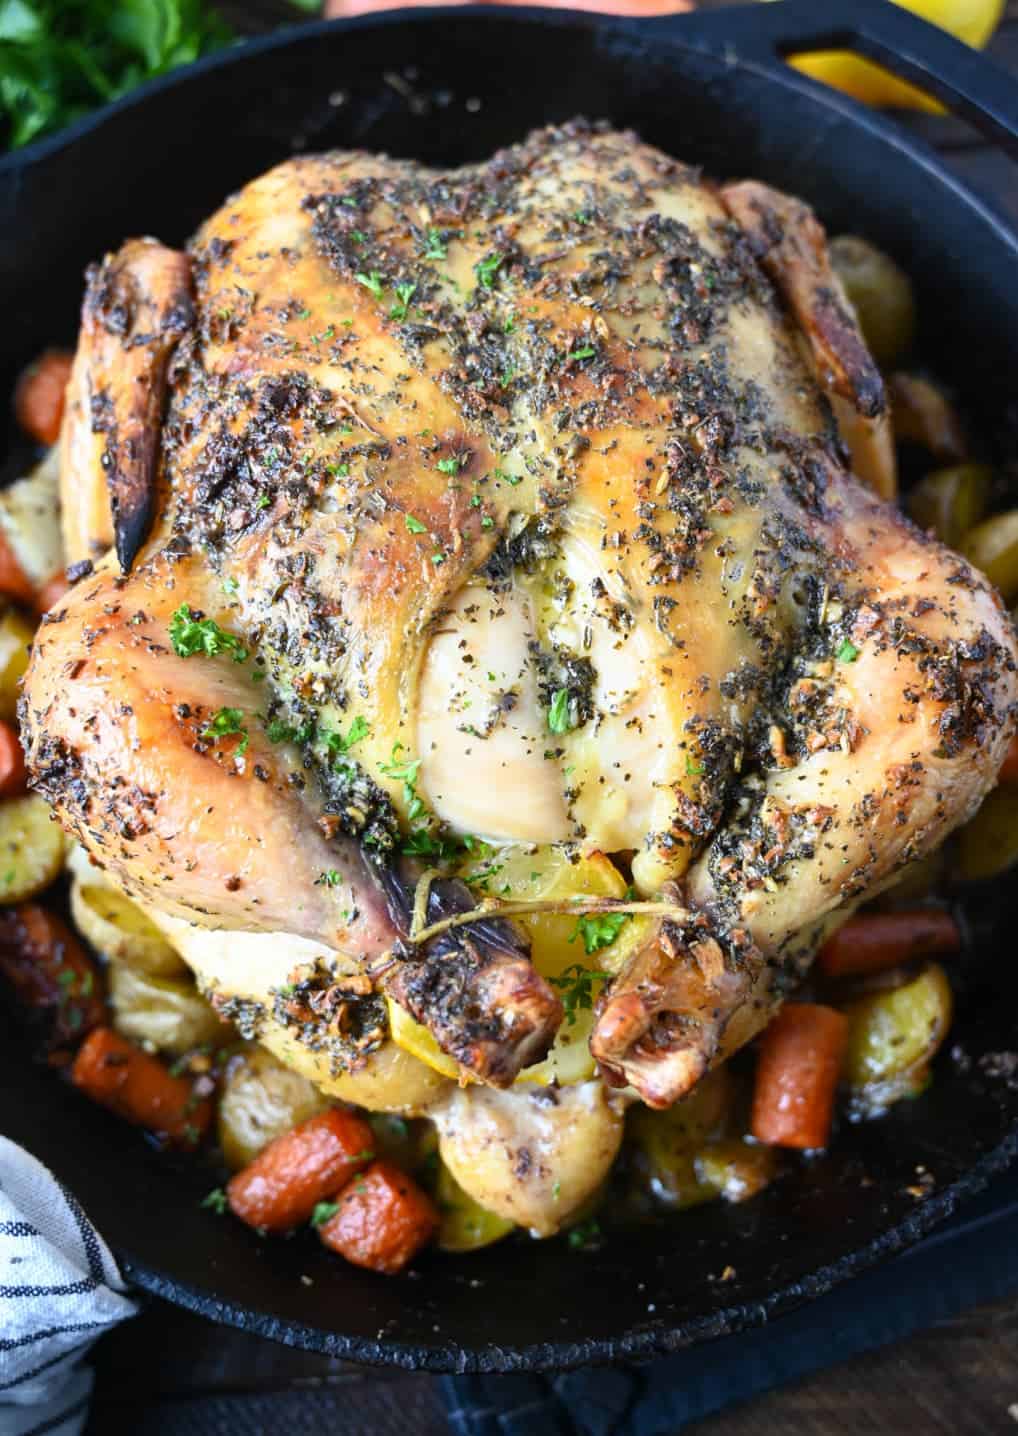 A whole lemon garlic roasted chicken on top of roasted veggies in a cast-iron skillet.